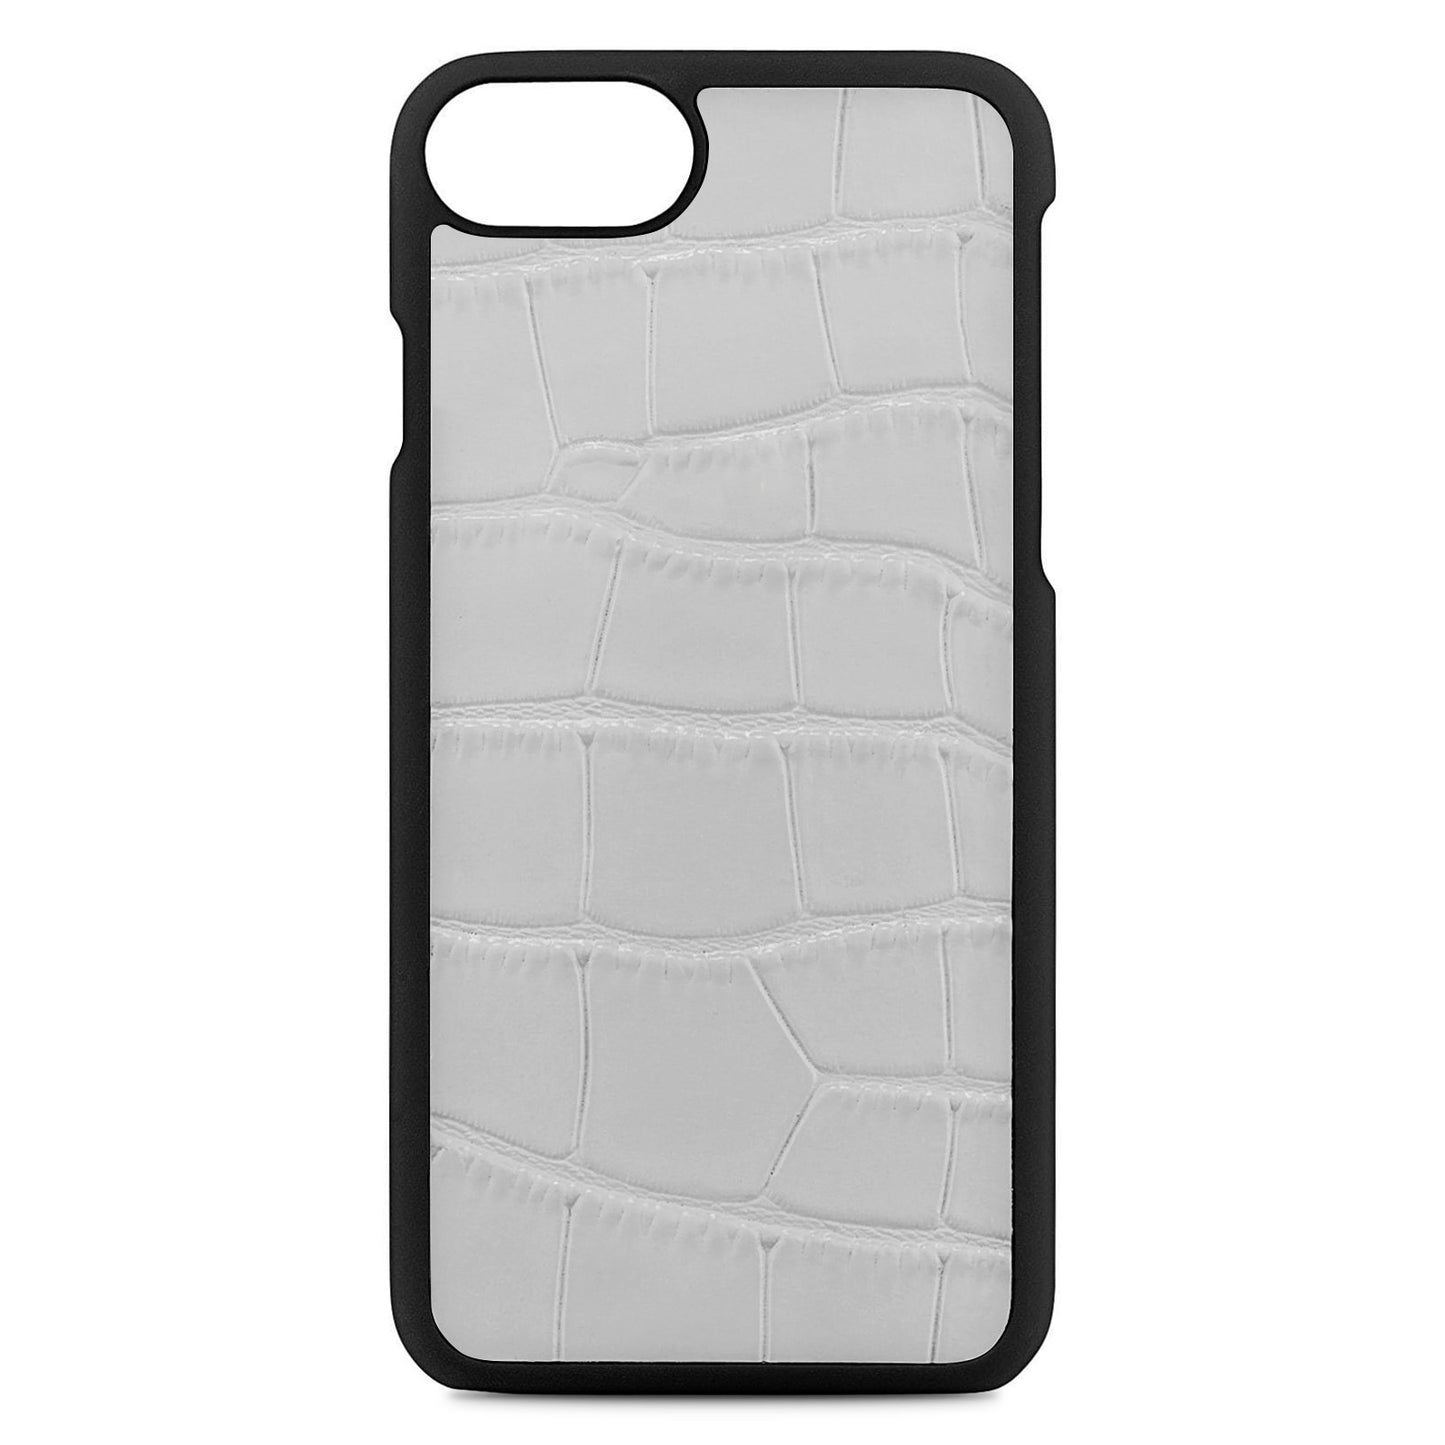 Blank Personalised Grey Croc Leather iPhone Case